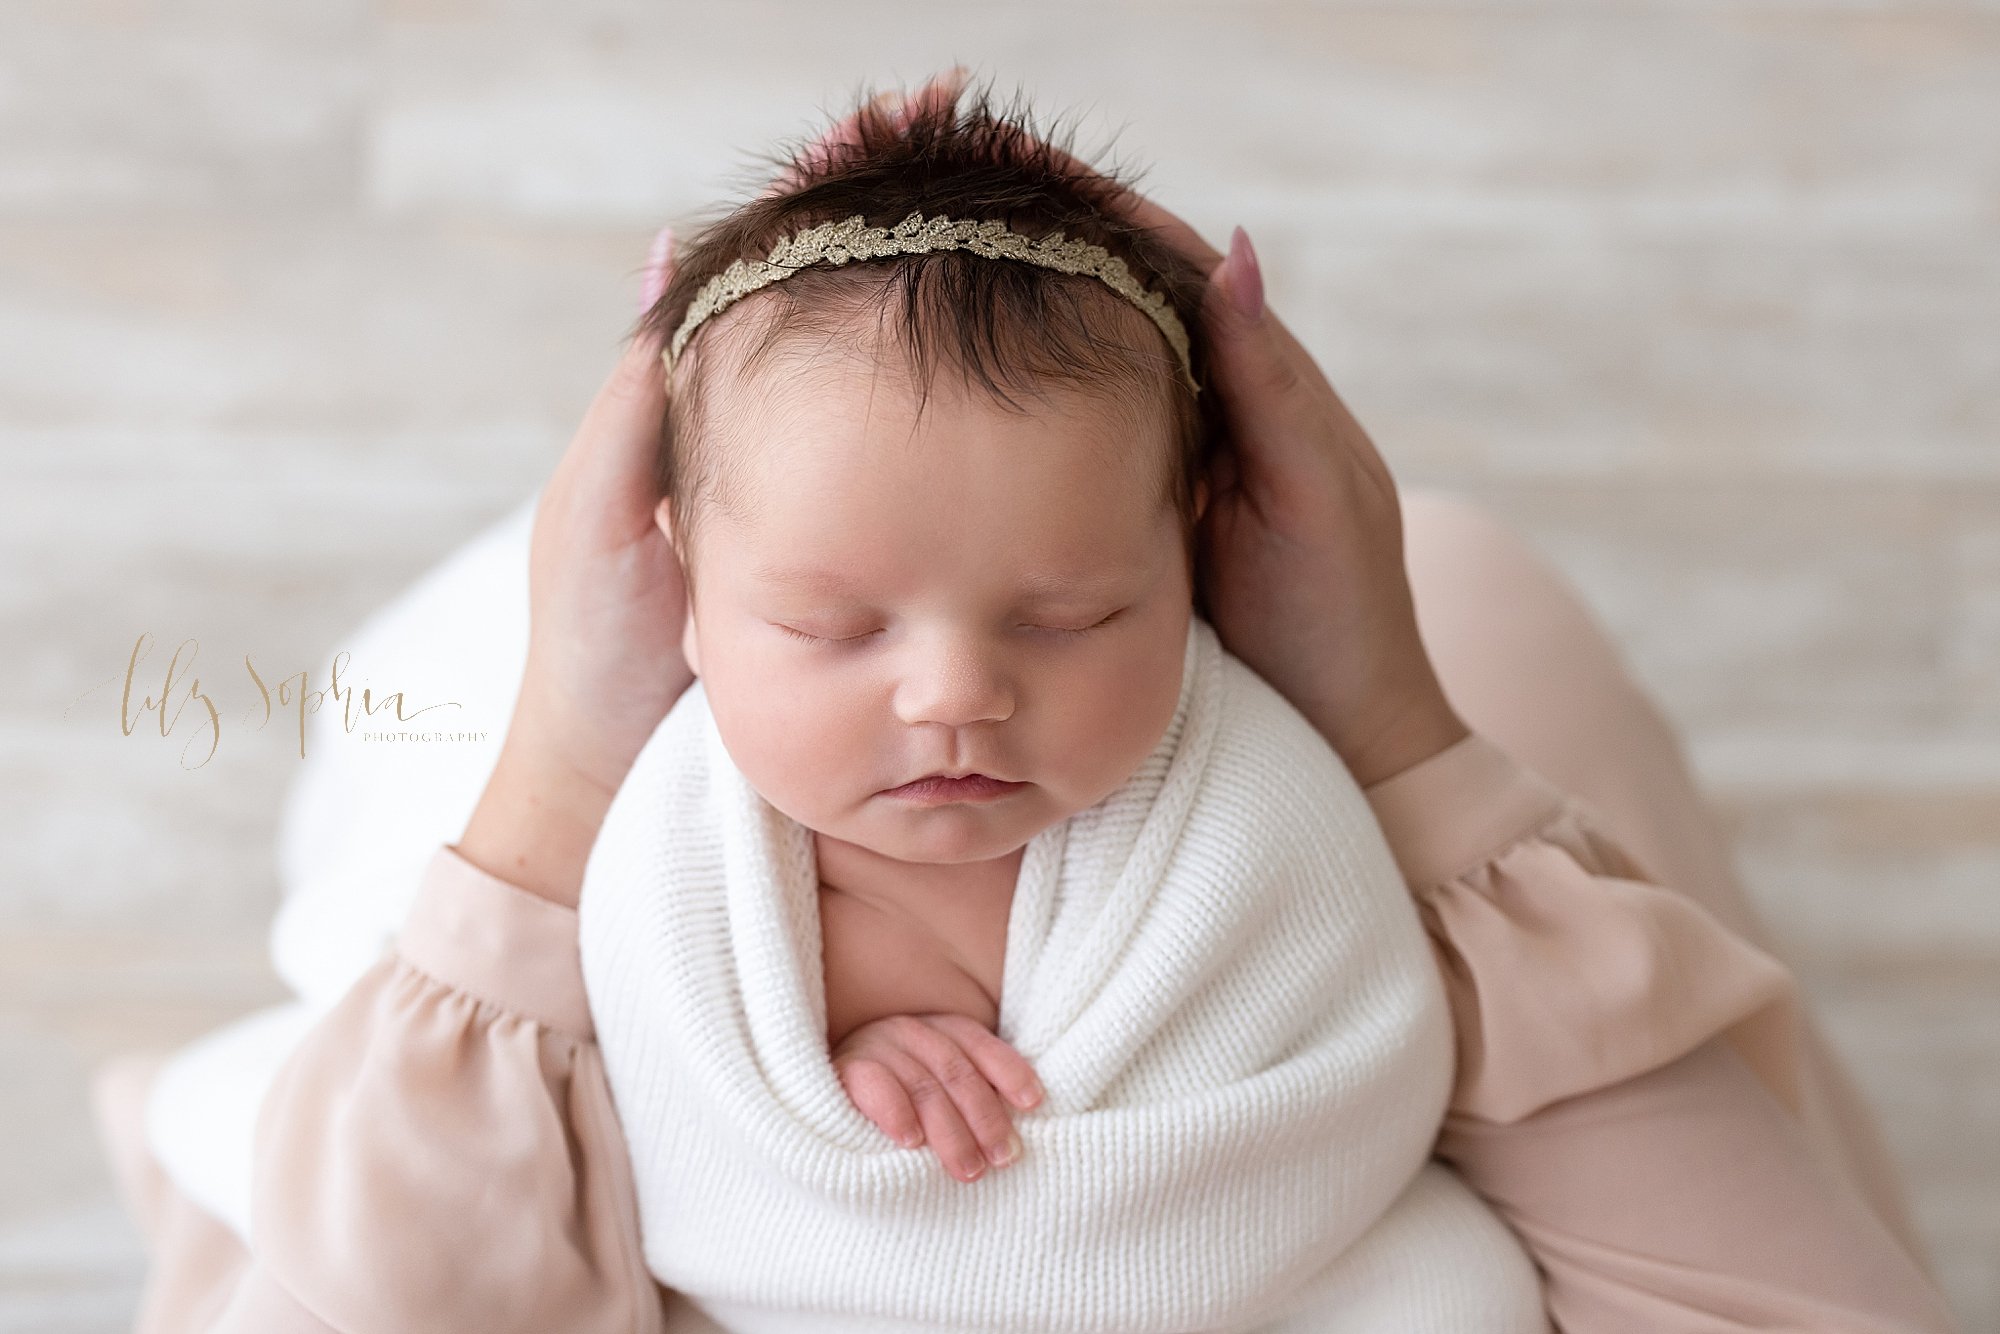  Newborn baby portrait of a newborn baby girl as she pulls her right hand out from a soft white knitted blanket swaddled around her as she sleeps peacefully in her mother’s hands taken in a natural light studio near Oakhurst in Atlanta. 